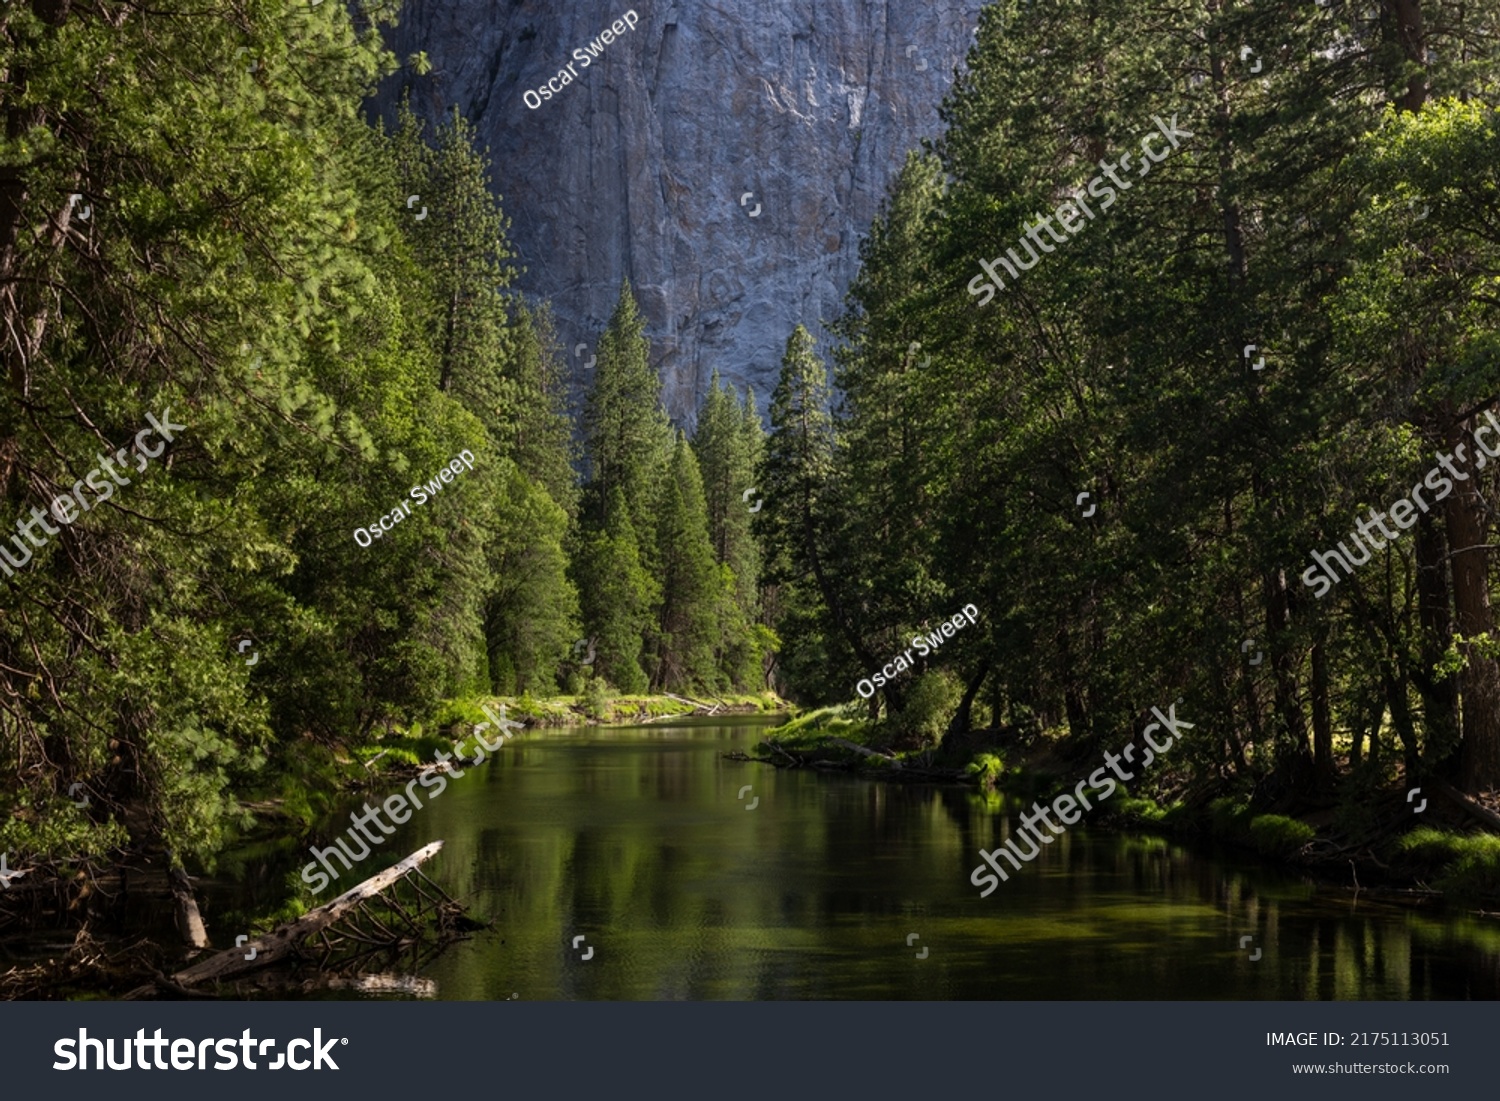 Scenic view of famous Yosemite Valley green river on a beautiful sunny day, Yosemite National Park, California, USA #2175113051